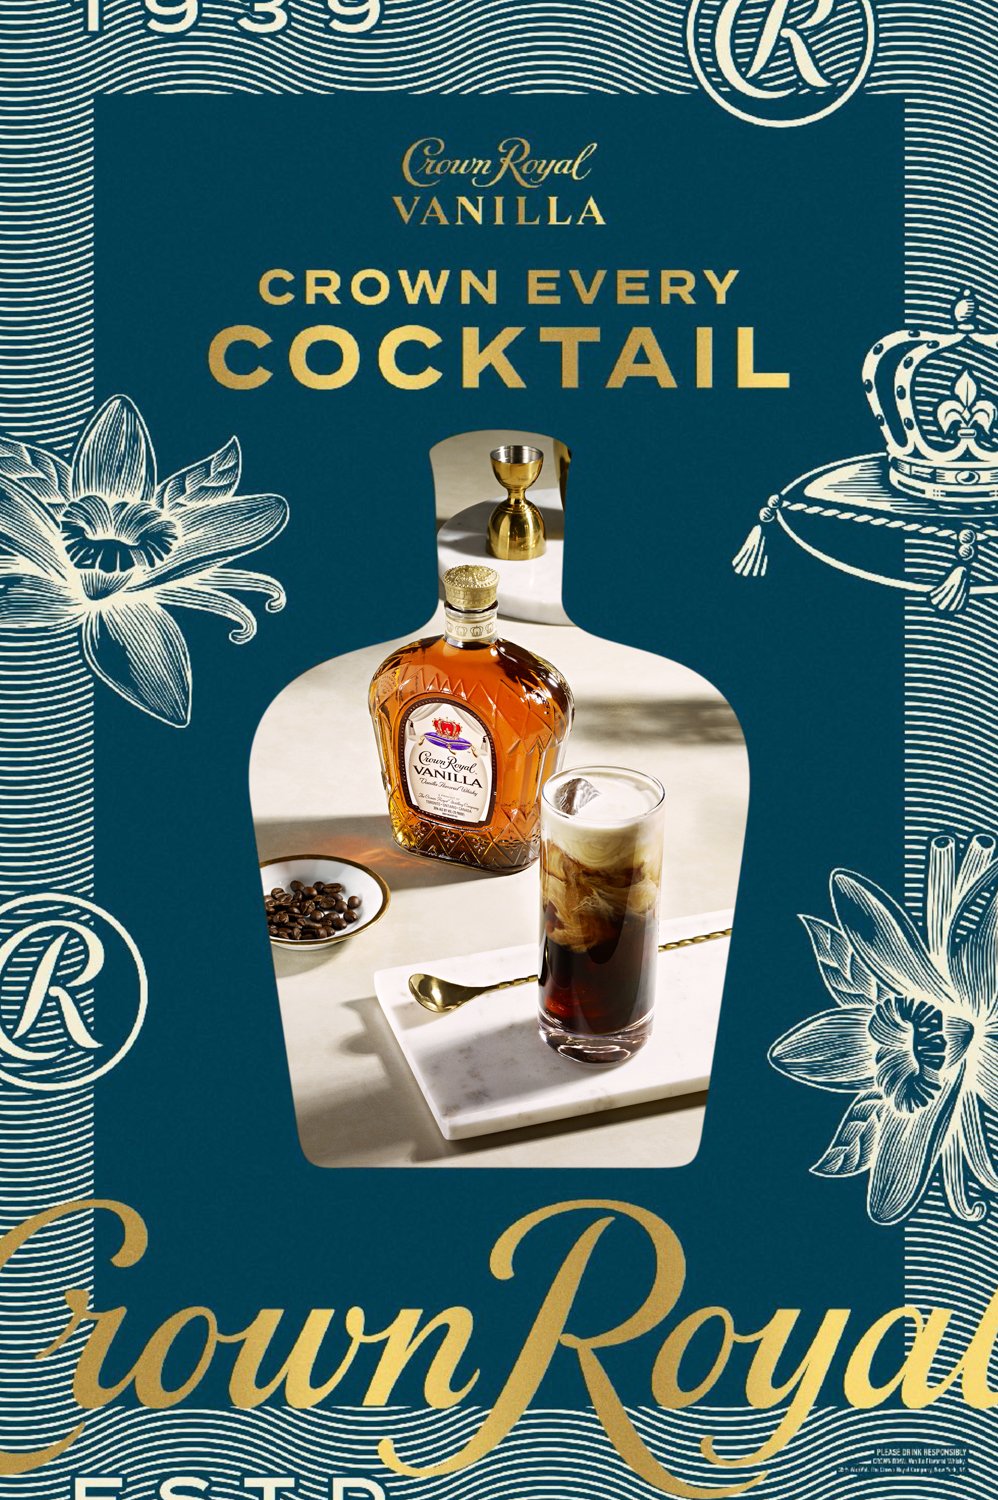 An ad for Crown Royal Vanilla featuring a cocktail.